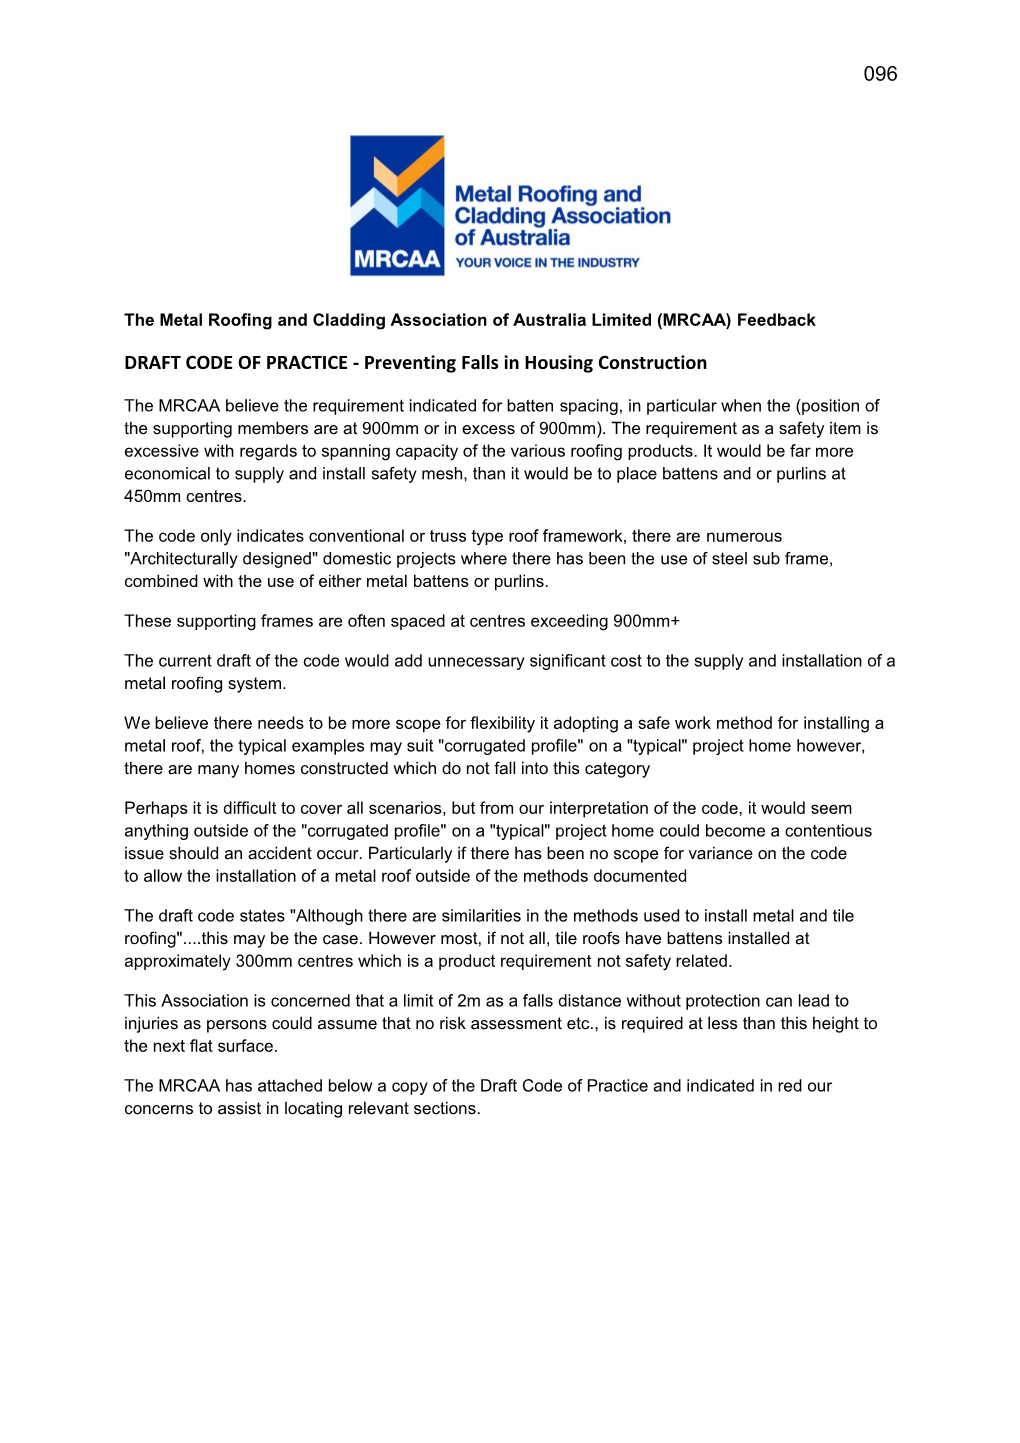 The Metal Roofing and Cladding Association of Australia Limited (MRCAA) Feedback